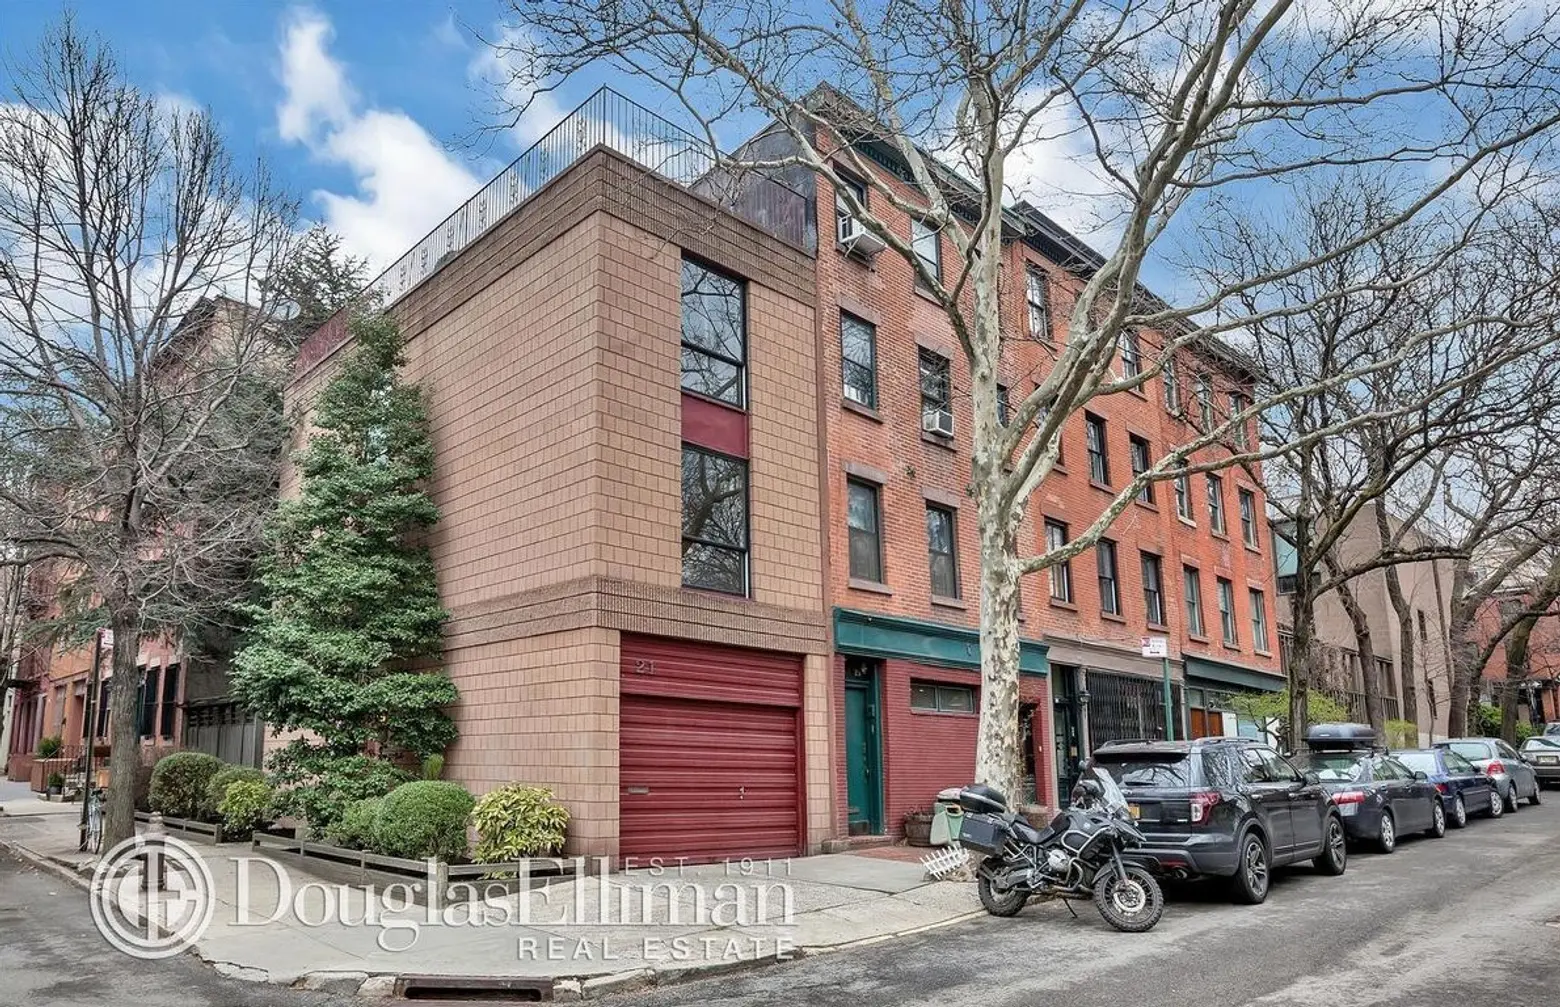 81 Hanson Place, 21 State Street, David Salle, Fort Greene, Brooklyn Heights, Modern townhouse, architecture, cool listings, high low, NYC real estate, brooklyn